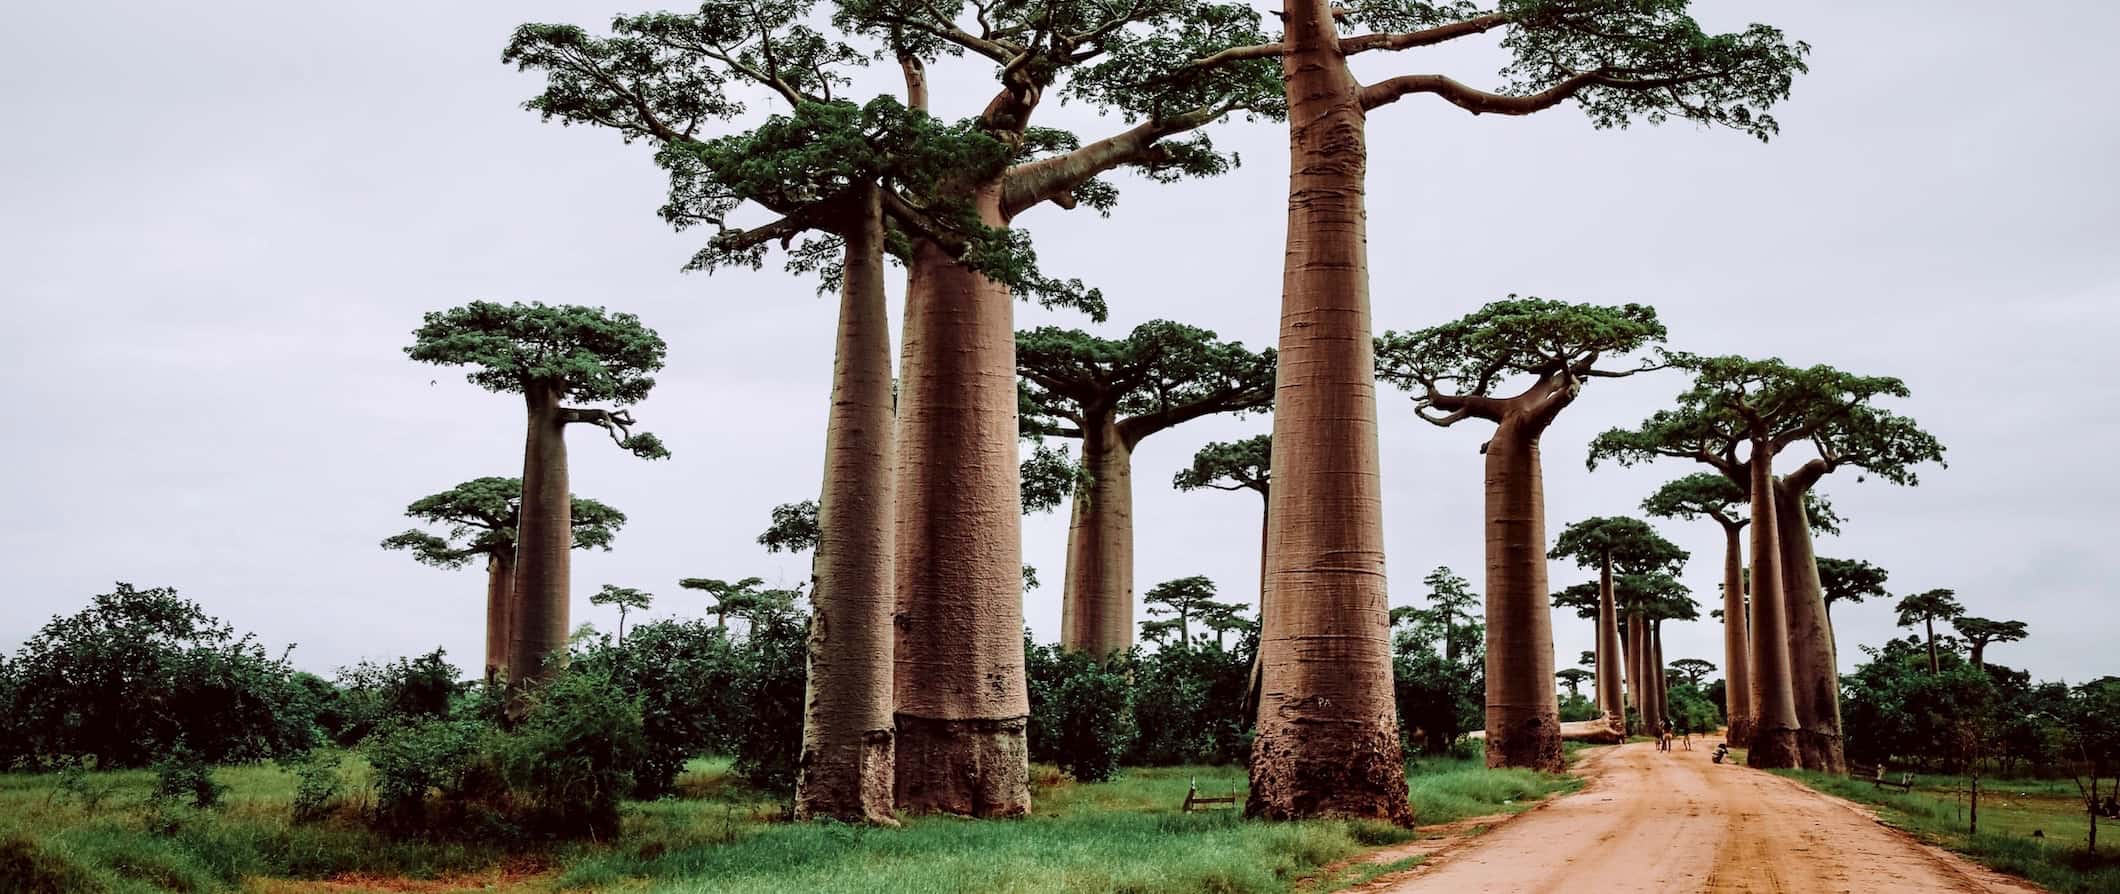 Locals with a cart standing near massive baobab trees in beautiful Madagascar, Africa